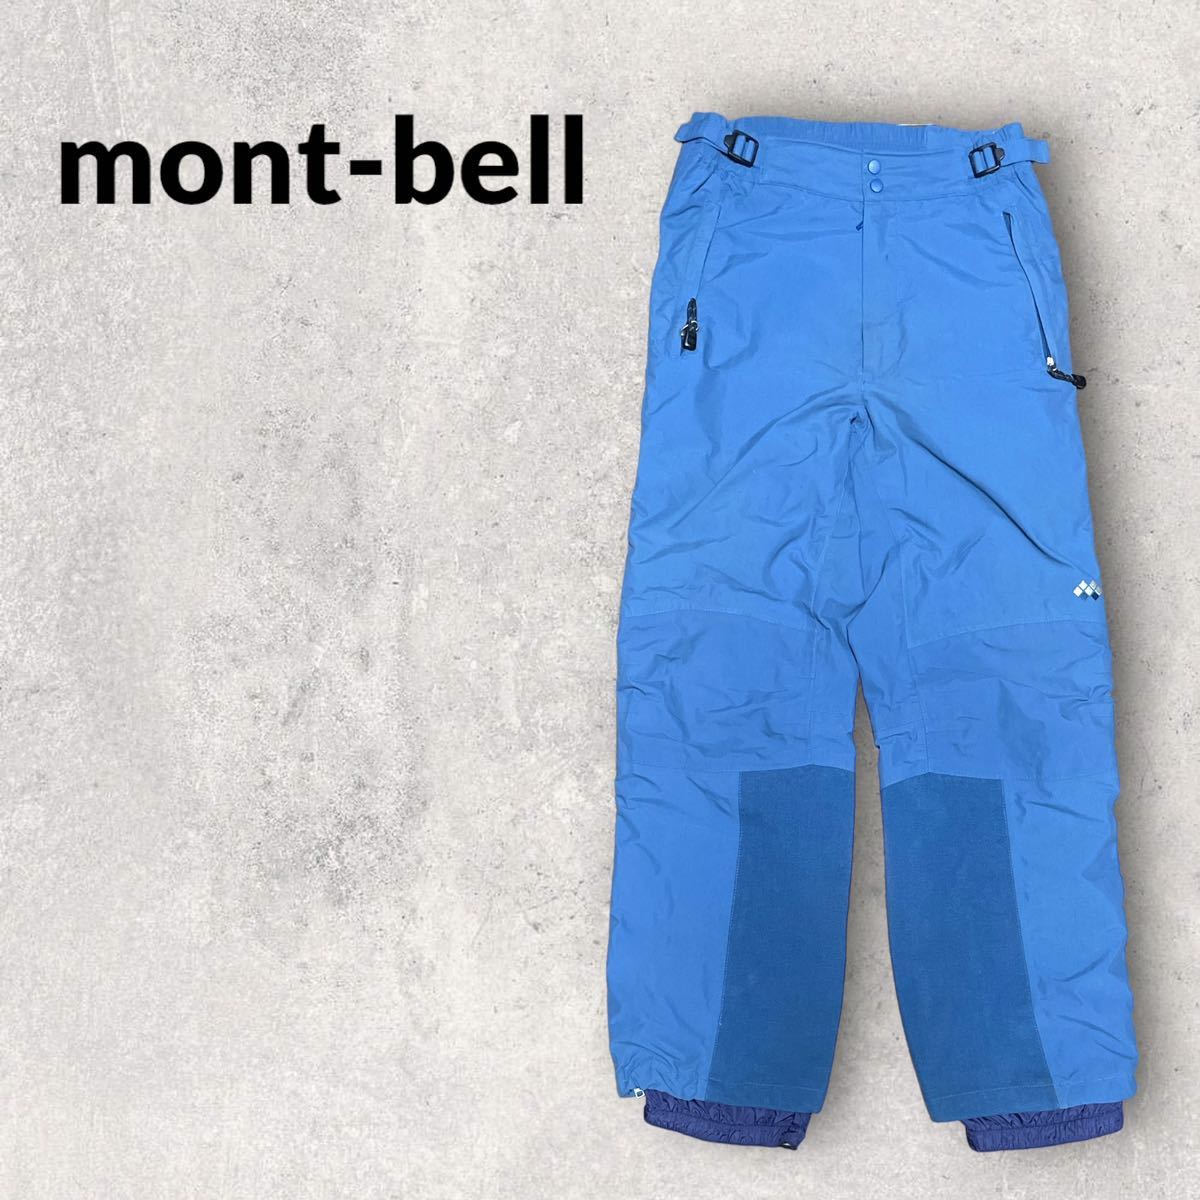 mont-bell モンベル 00's 初期 GORE-TEX Thinsulate ドロワットパンツ